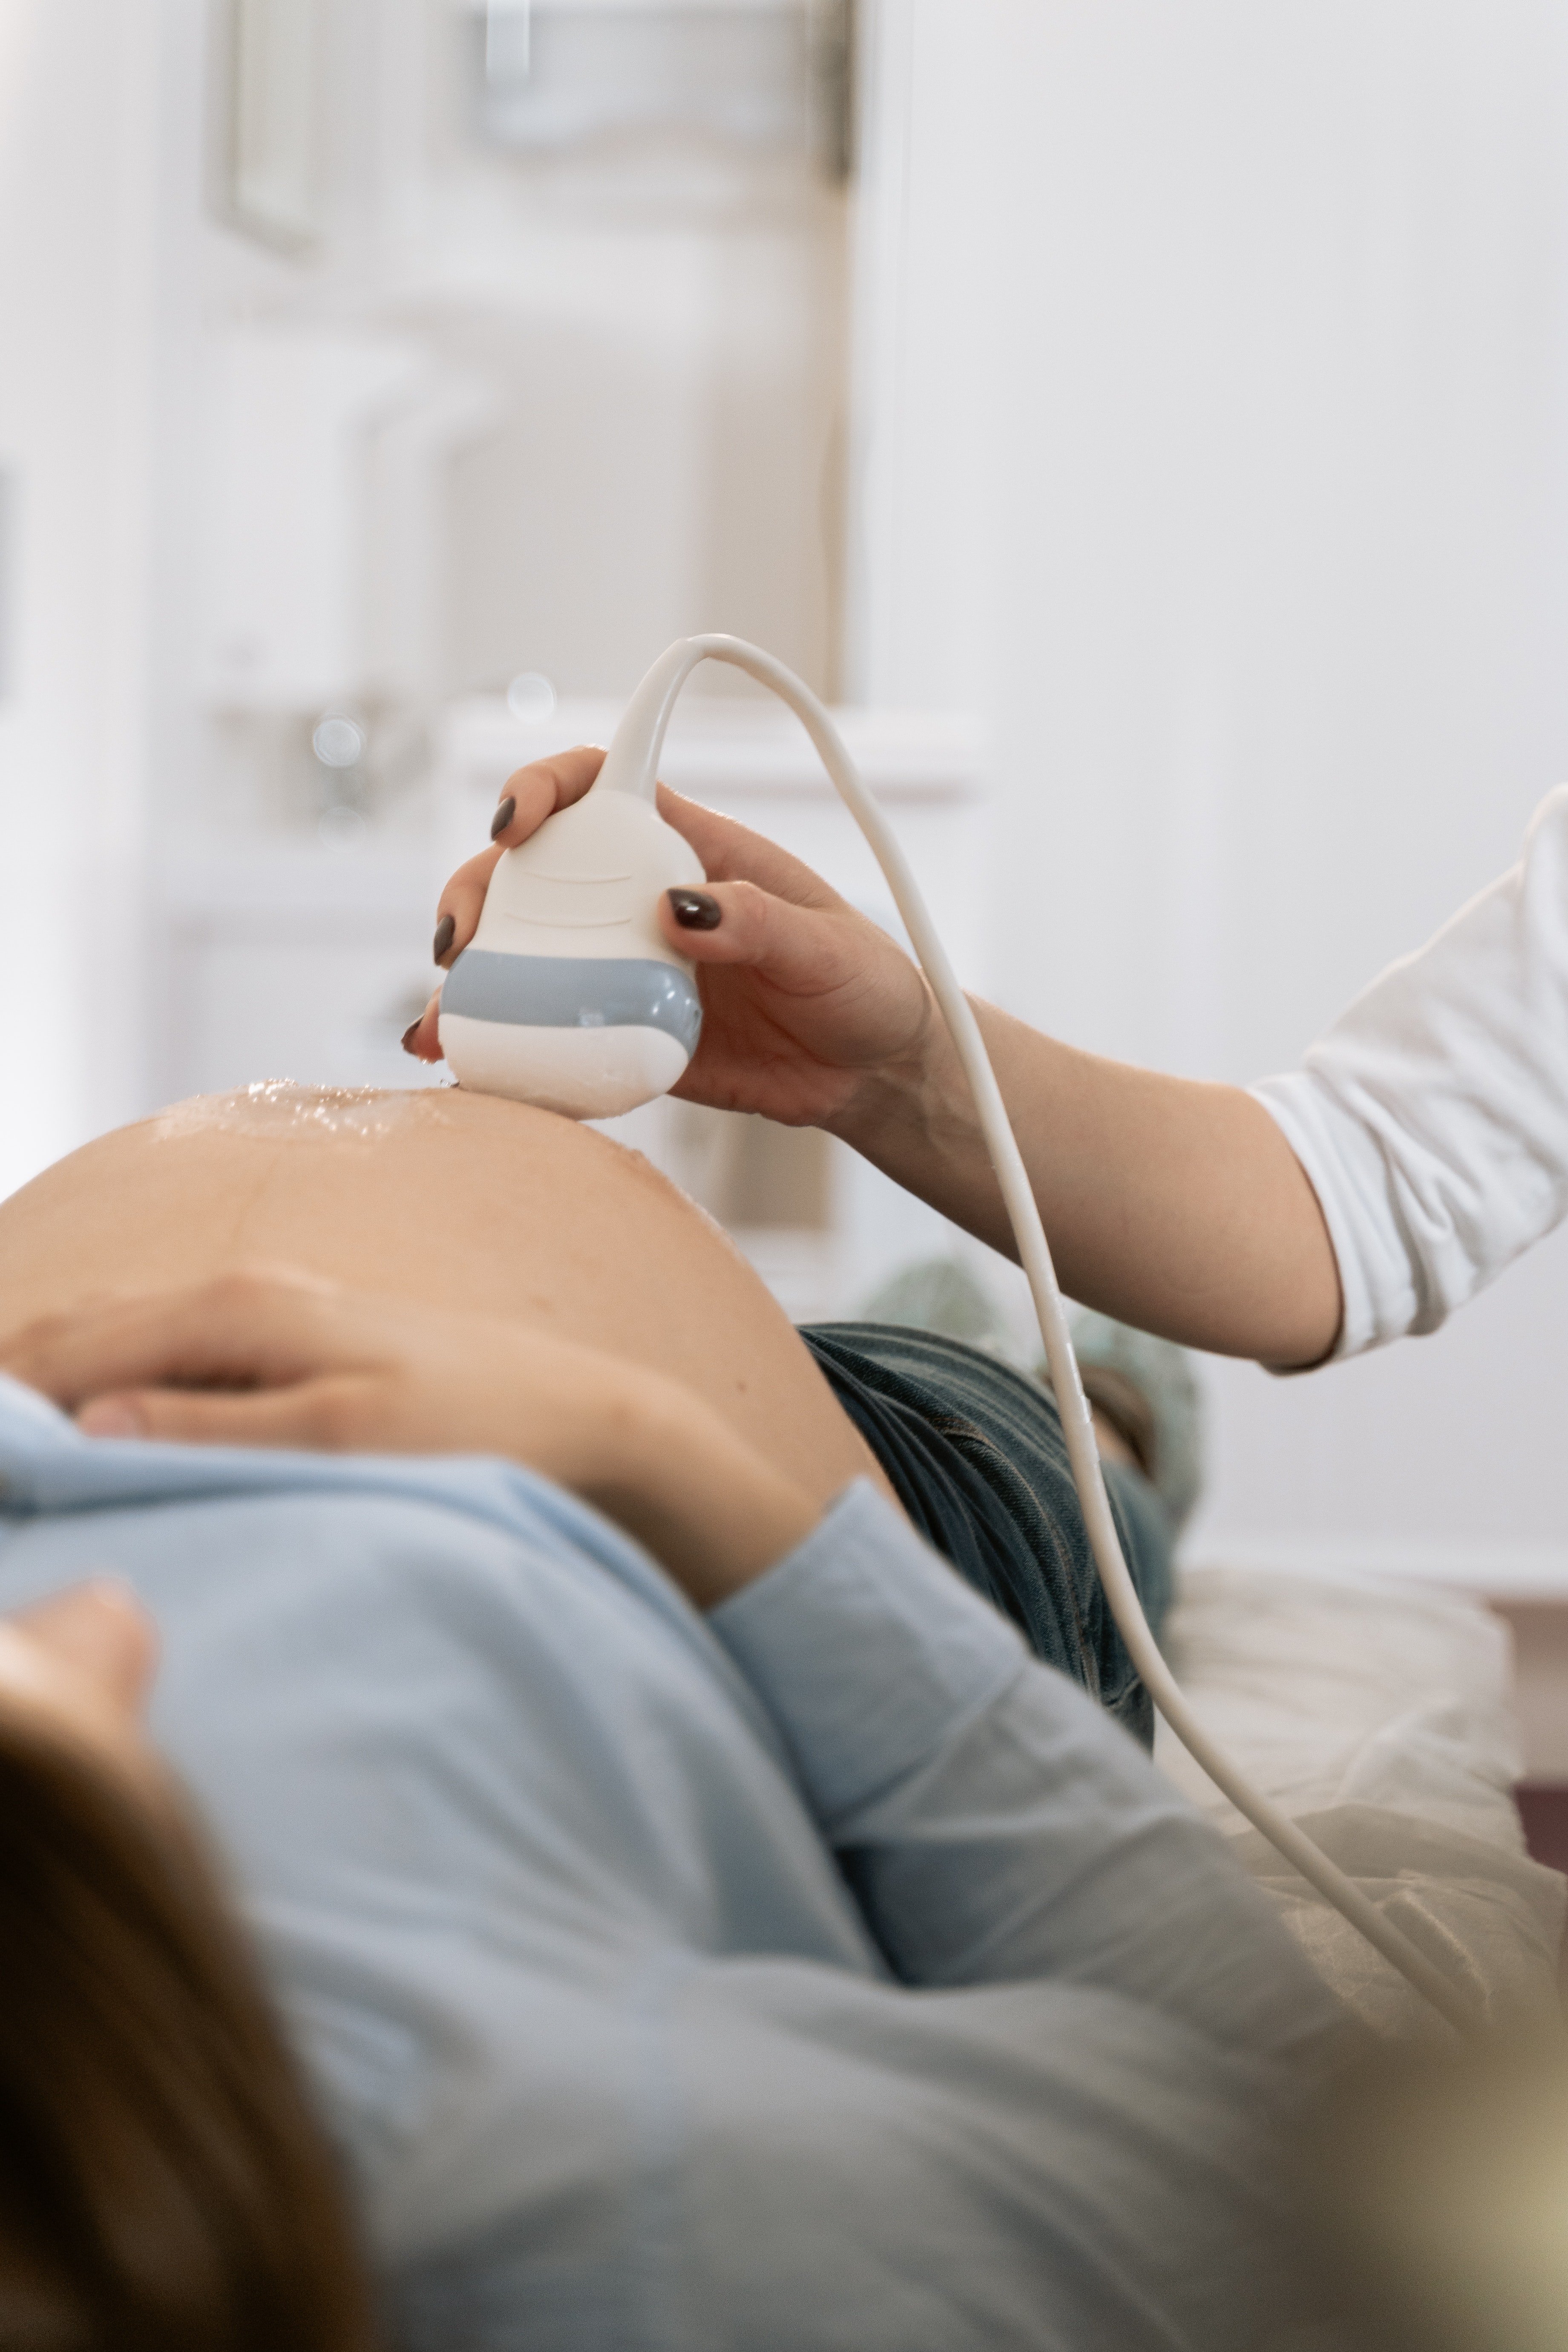 Image of a pregnant woman during a scan. | Source: Pexels